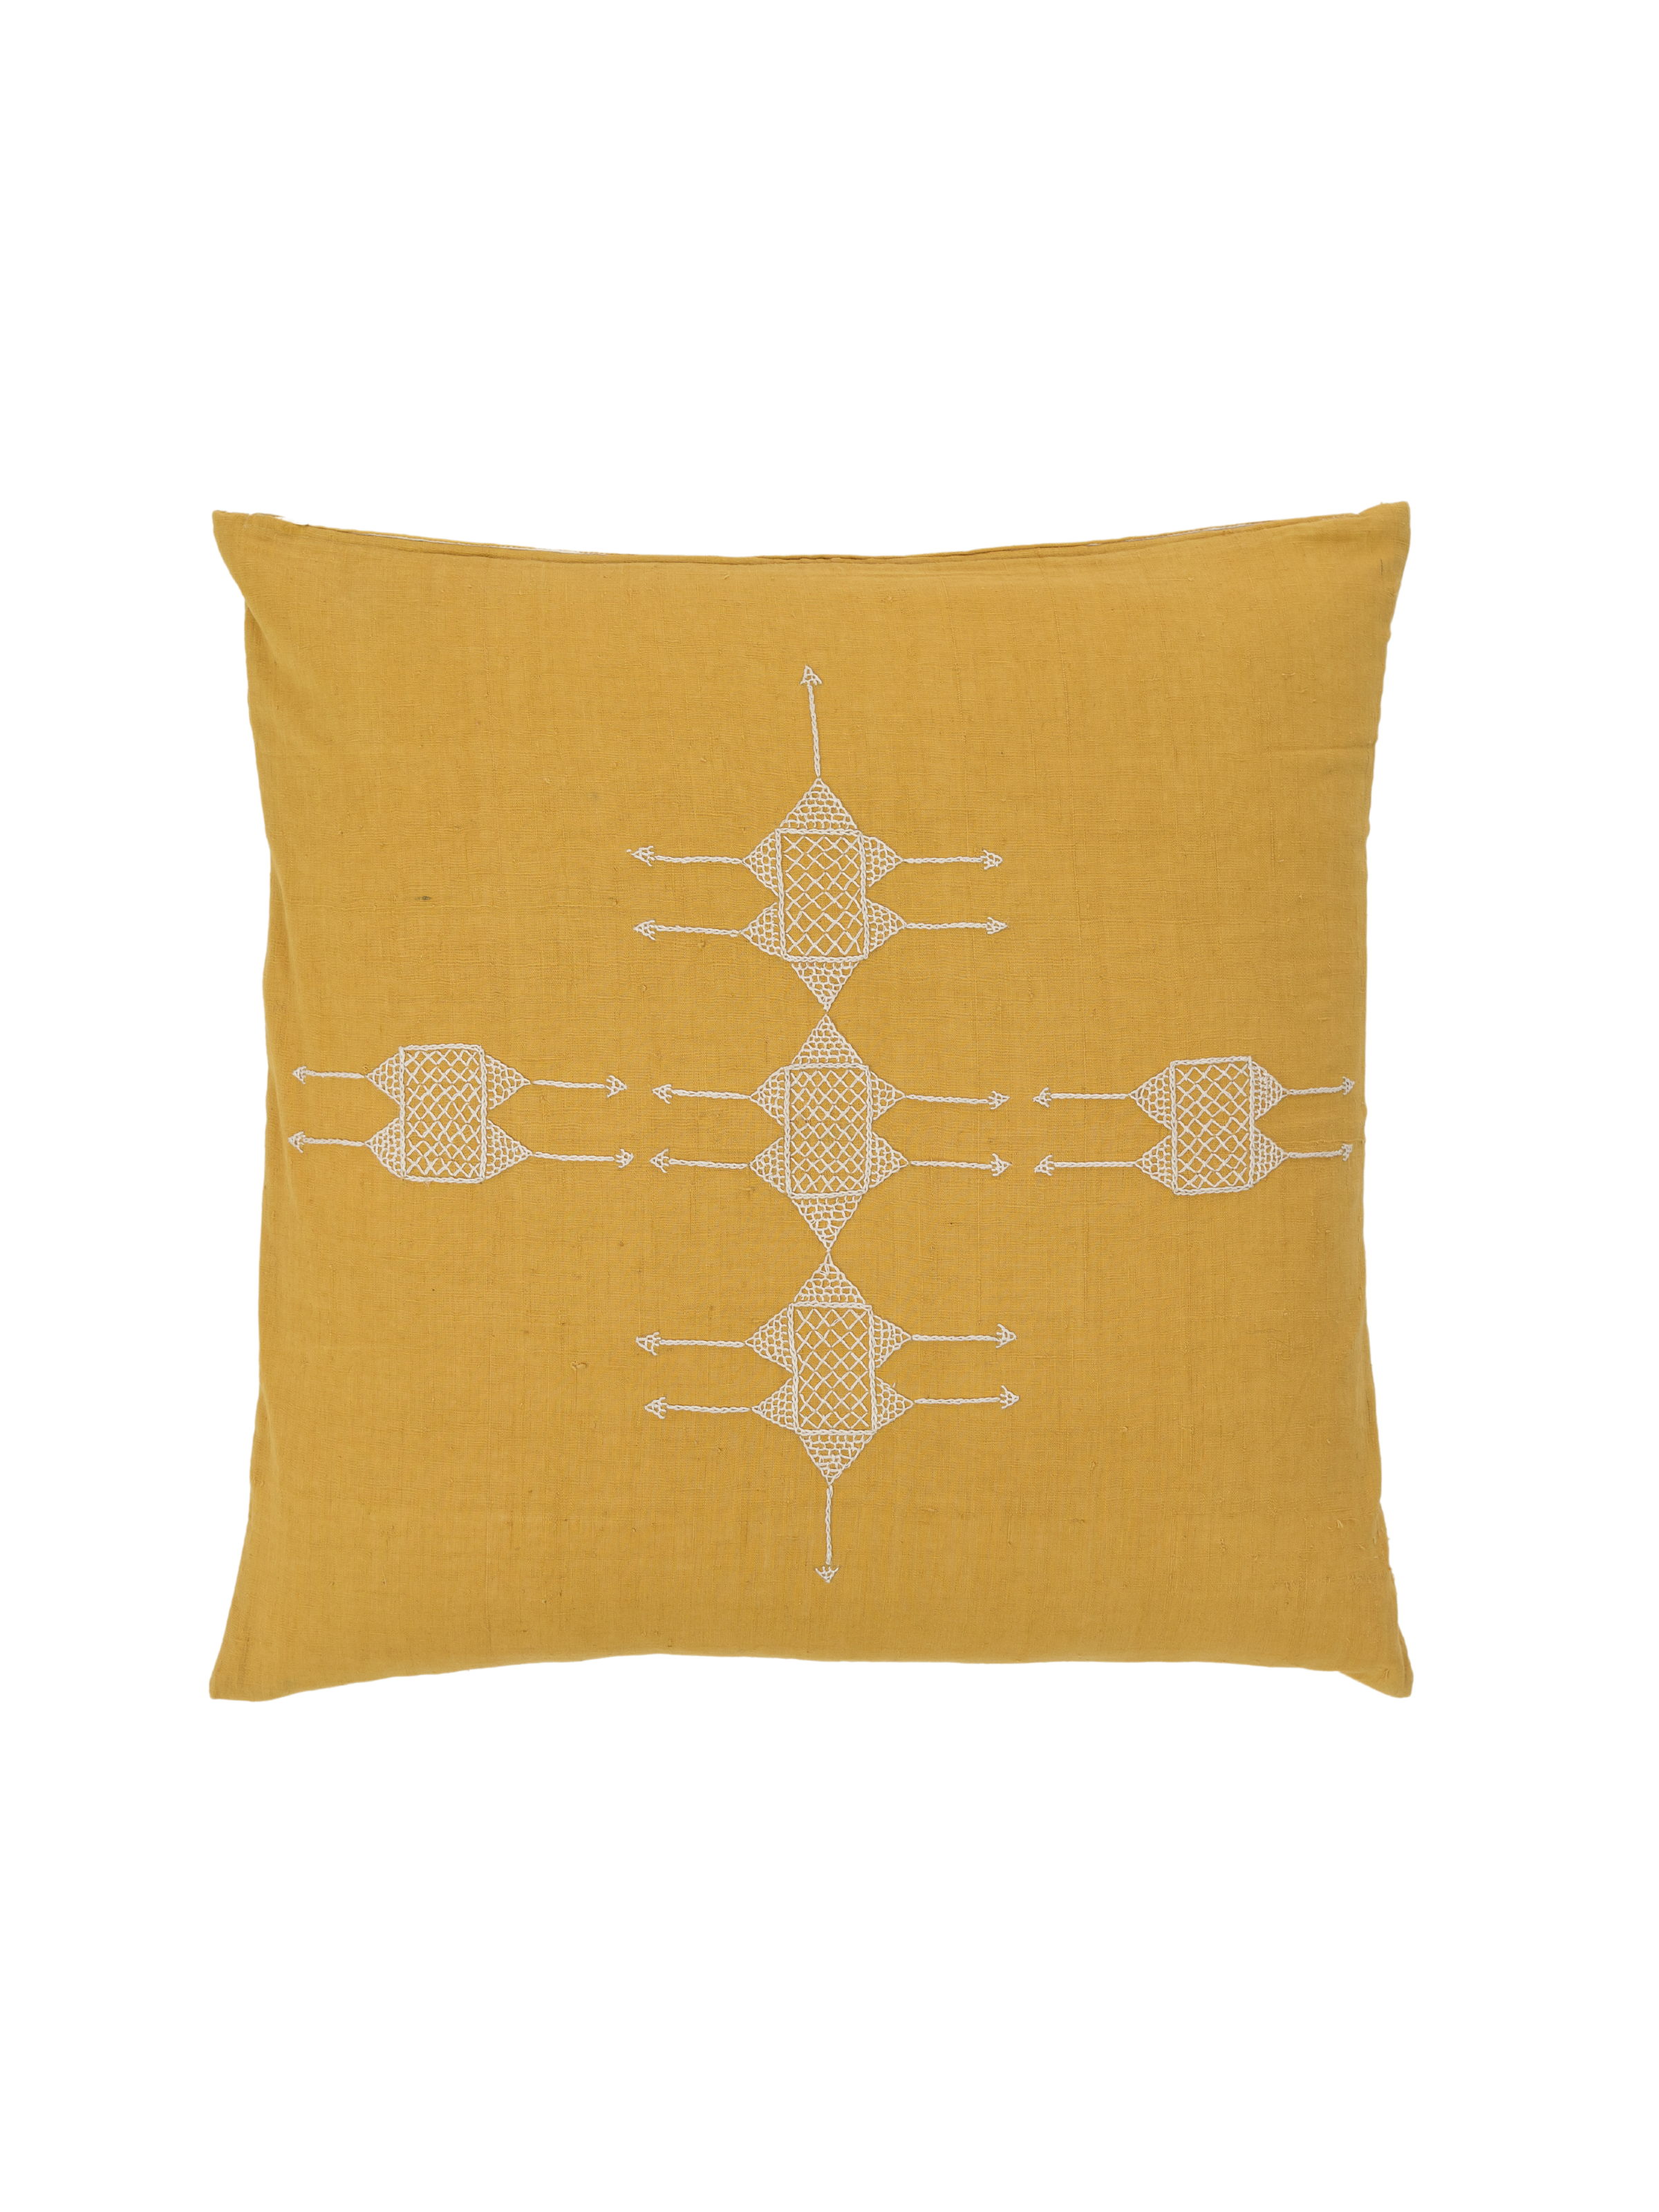 Ruffia Yellow Embroidered Pillow